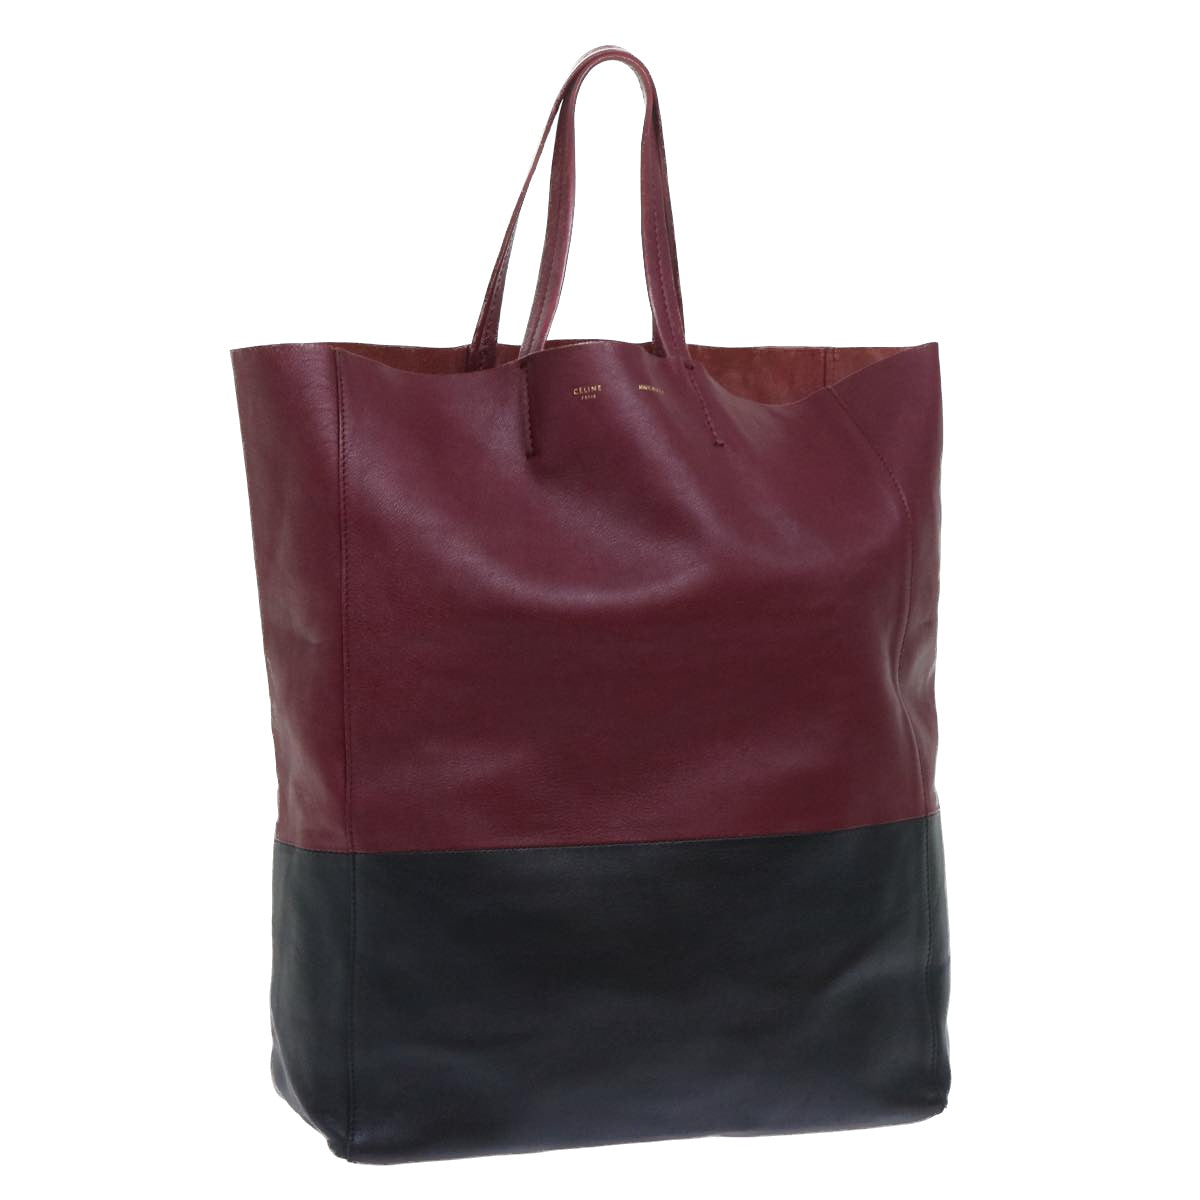 CELINE Tote Bag Leather Wine Red Auth bs7779